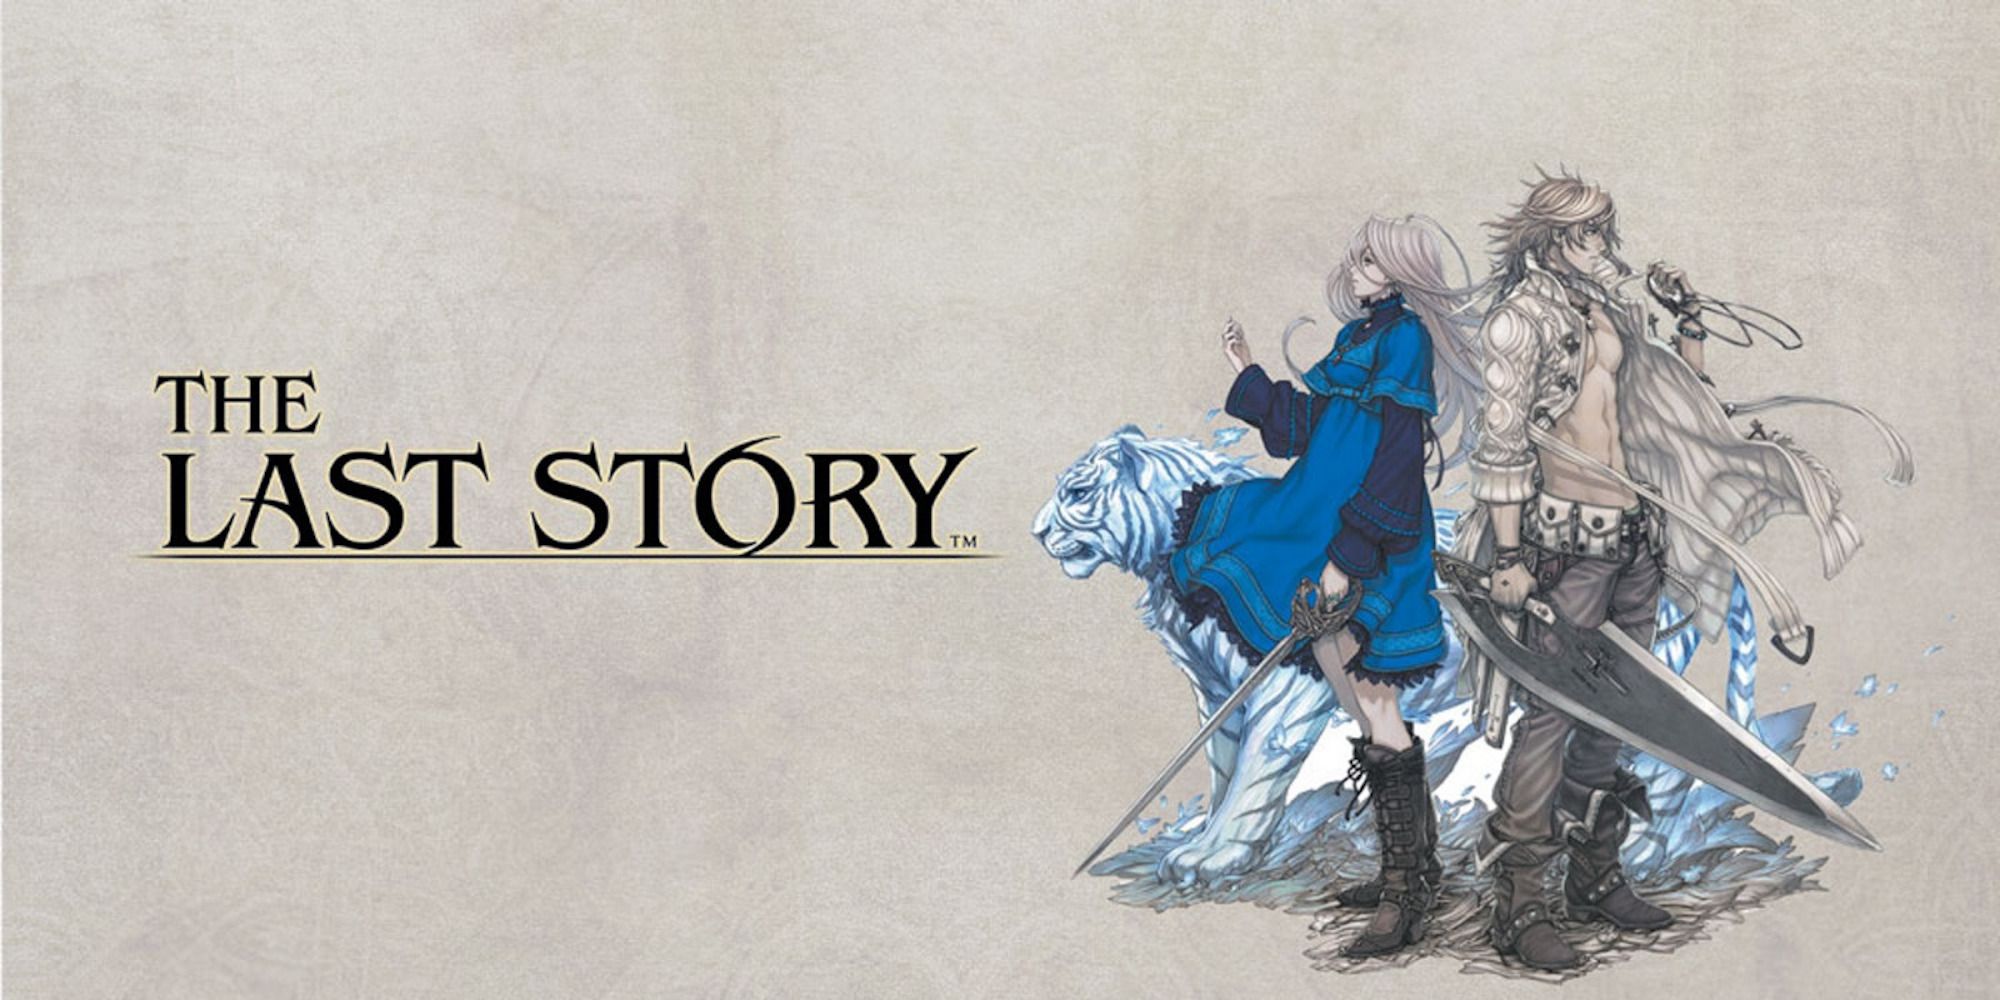 Promo art featuring characters from The Last Story